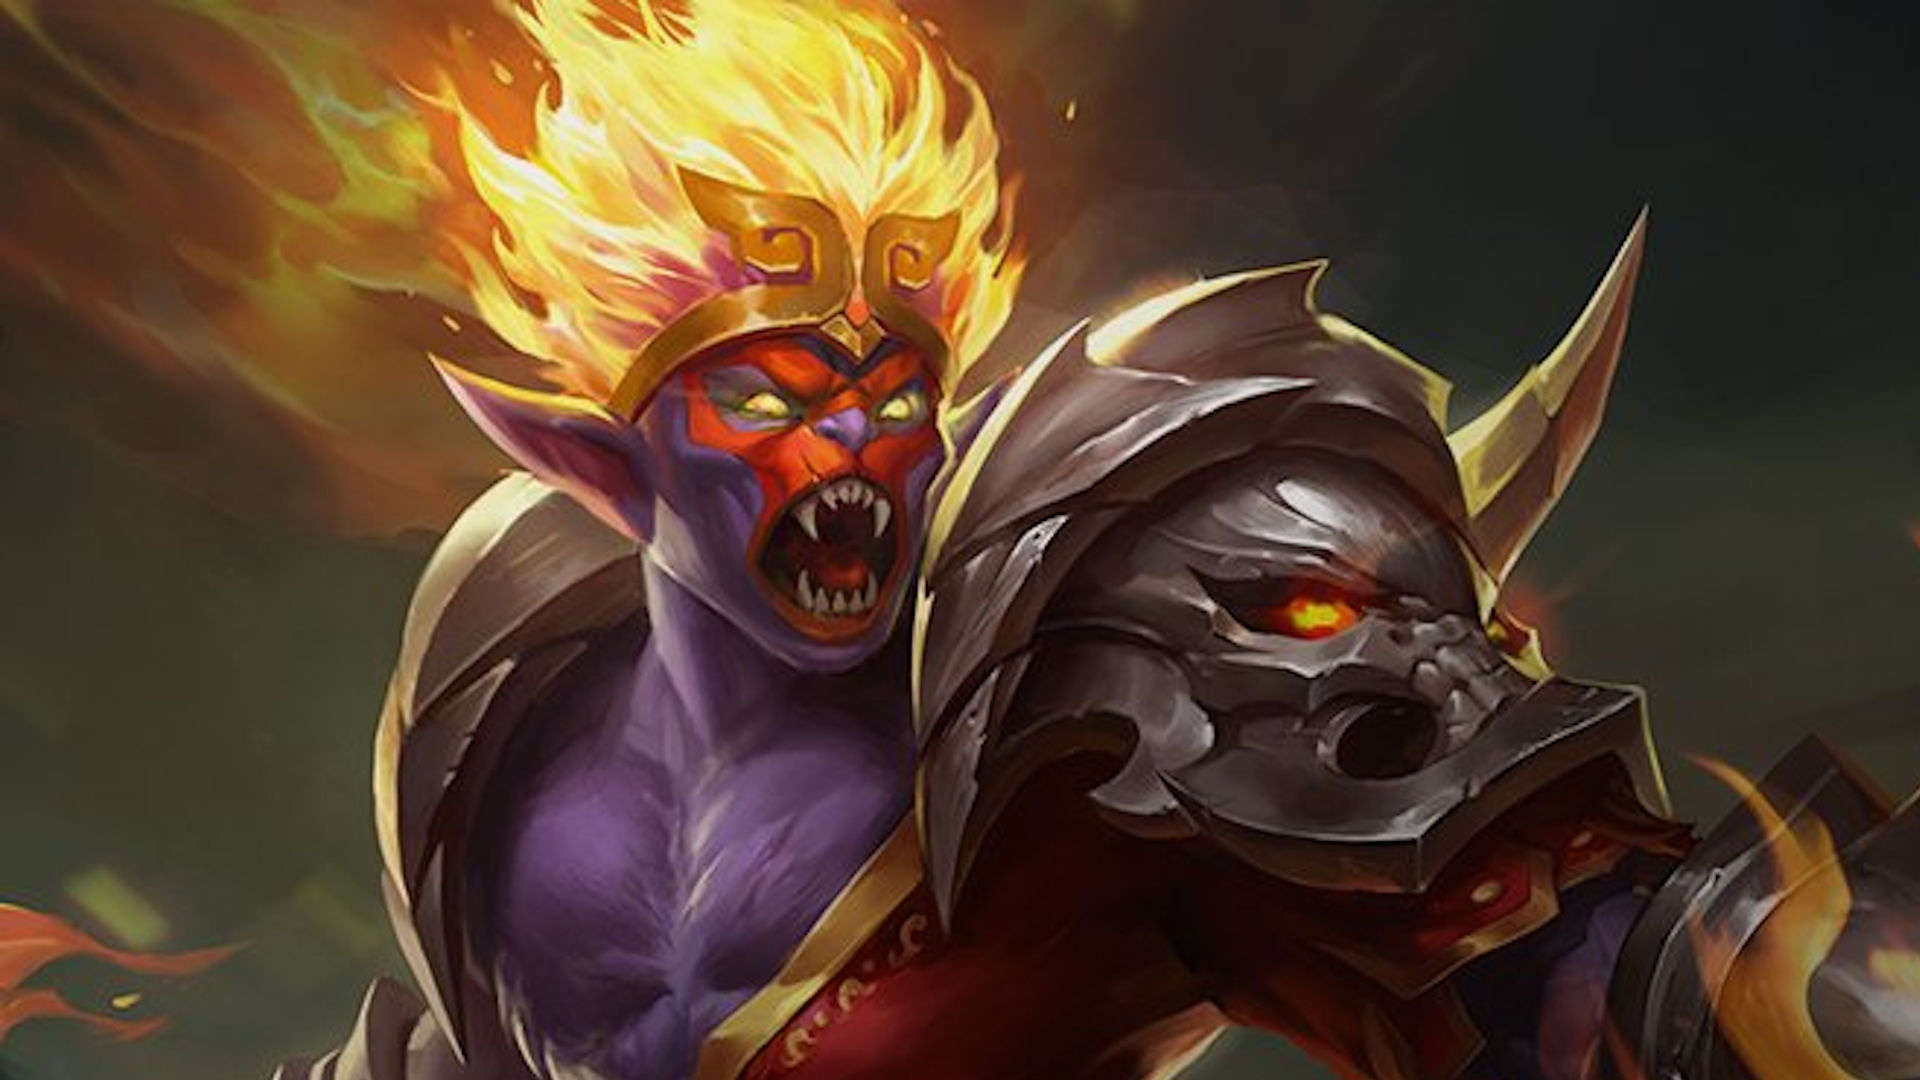 Best iPhone games: Mobile Legends. Image shows a demon with flaming red hair.